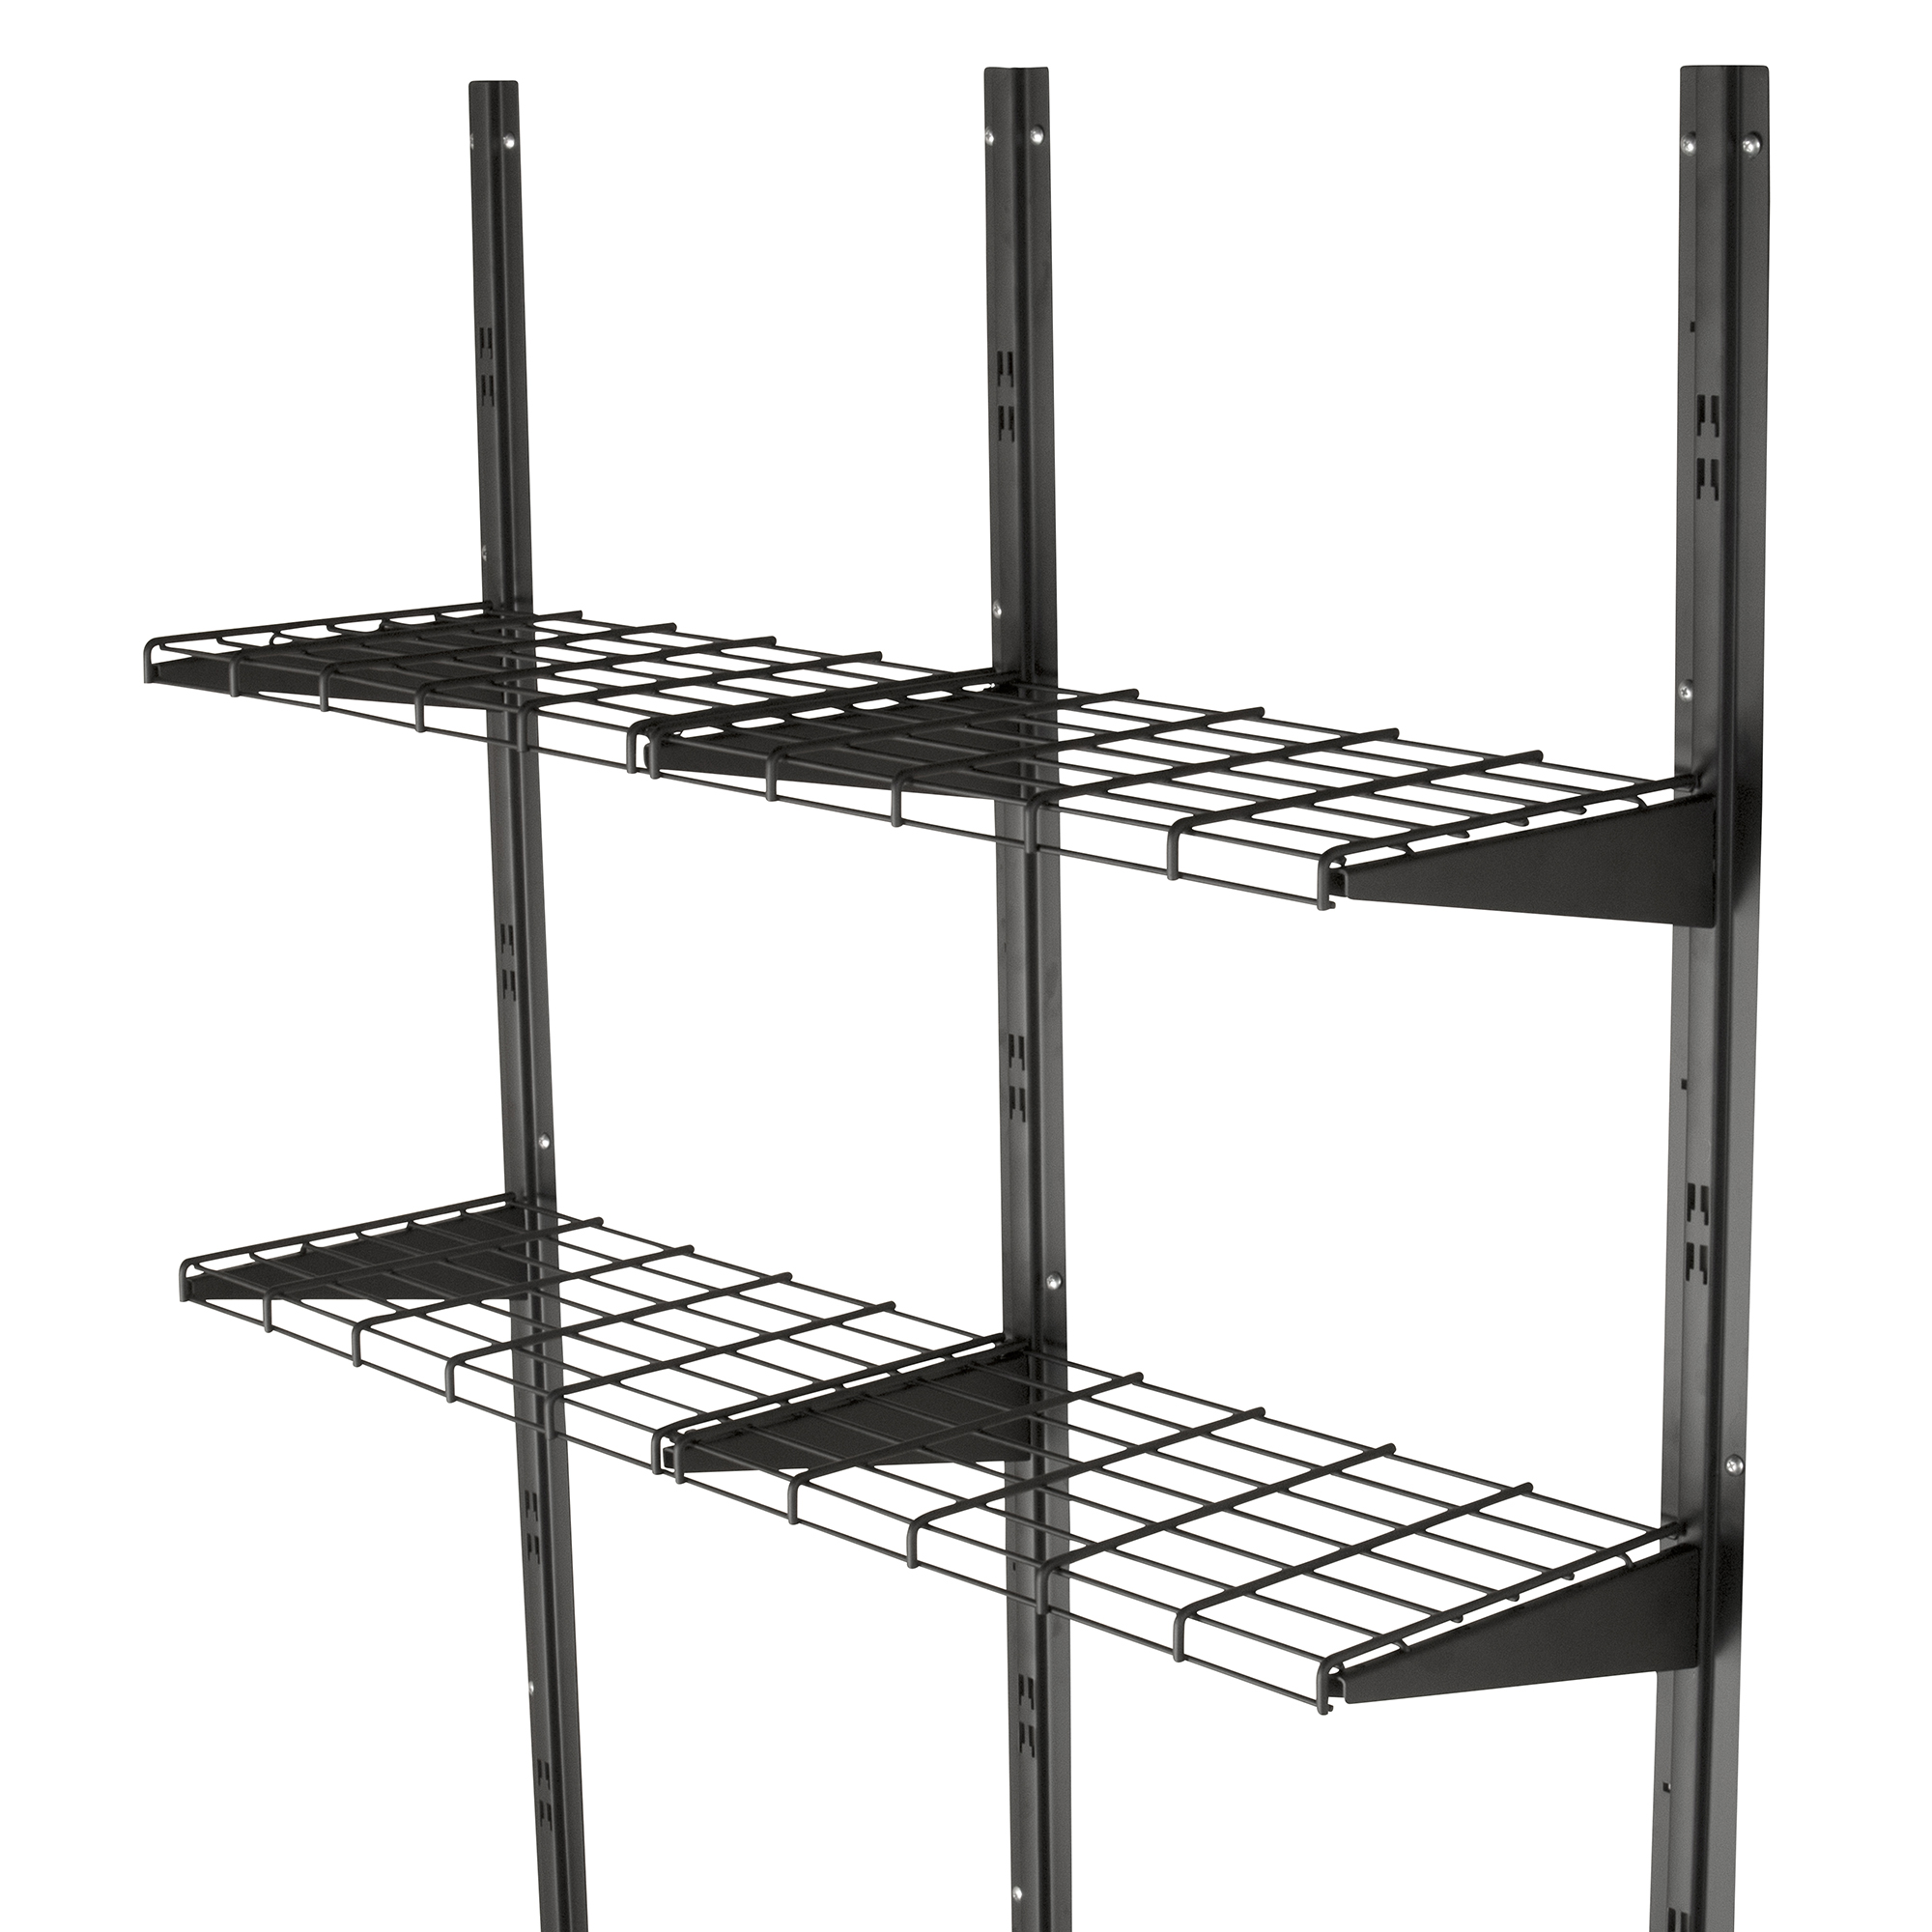 Suncast Storage Shed Metal Wire Shelf Kit with 100 lbs. Capacity, Black - image 1 of 3